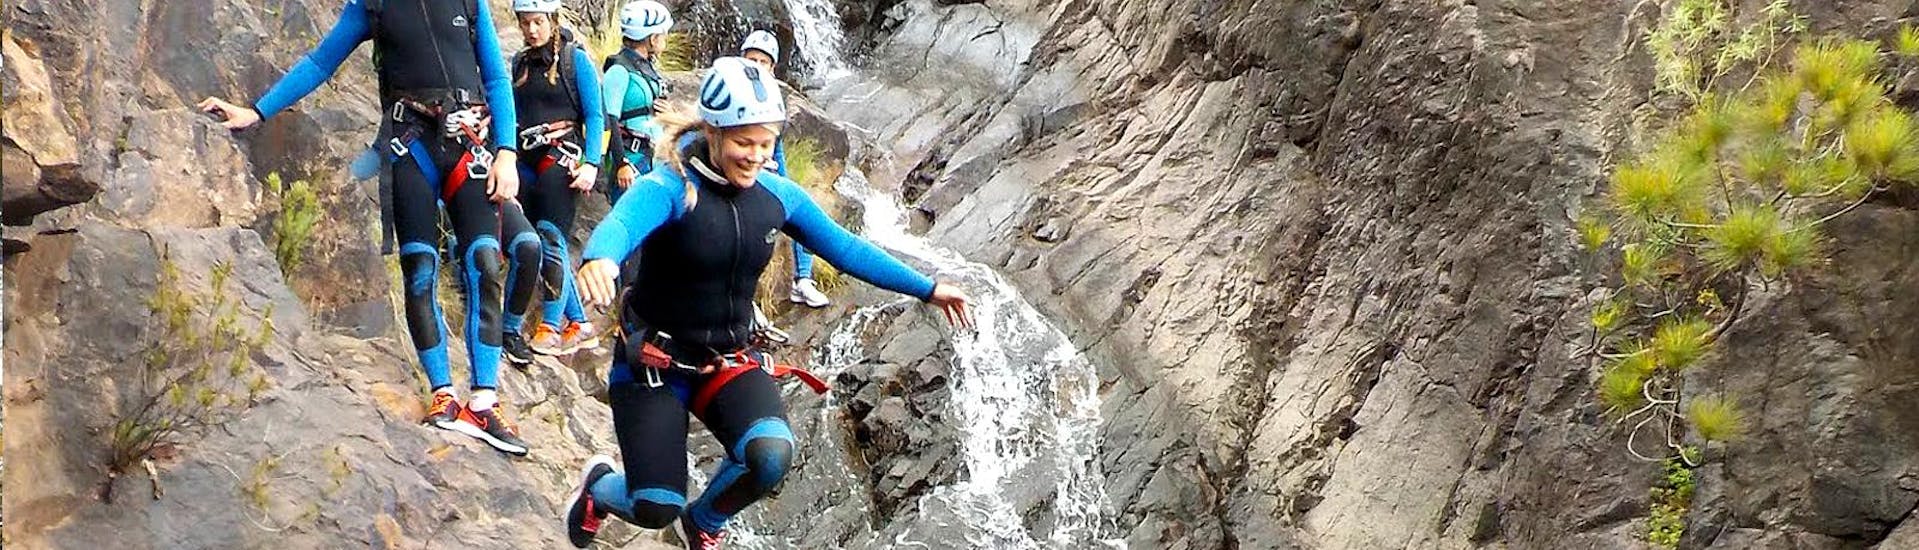 During the Canyoning at Barranco de los Cernícalos in Gran Canaria a woman jumps from the cliff into the water under the supervision of the guide from Mojo Picón Aventura.